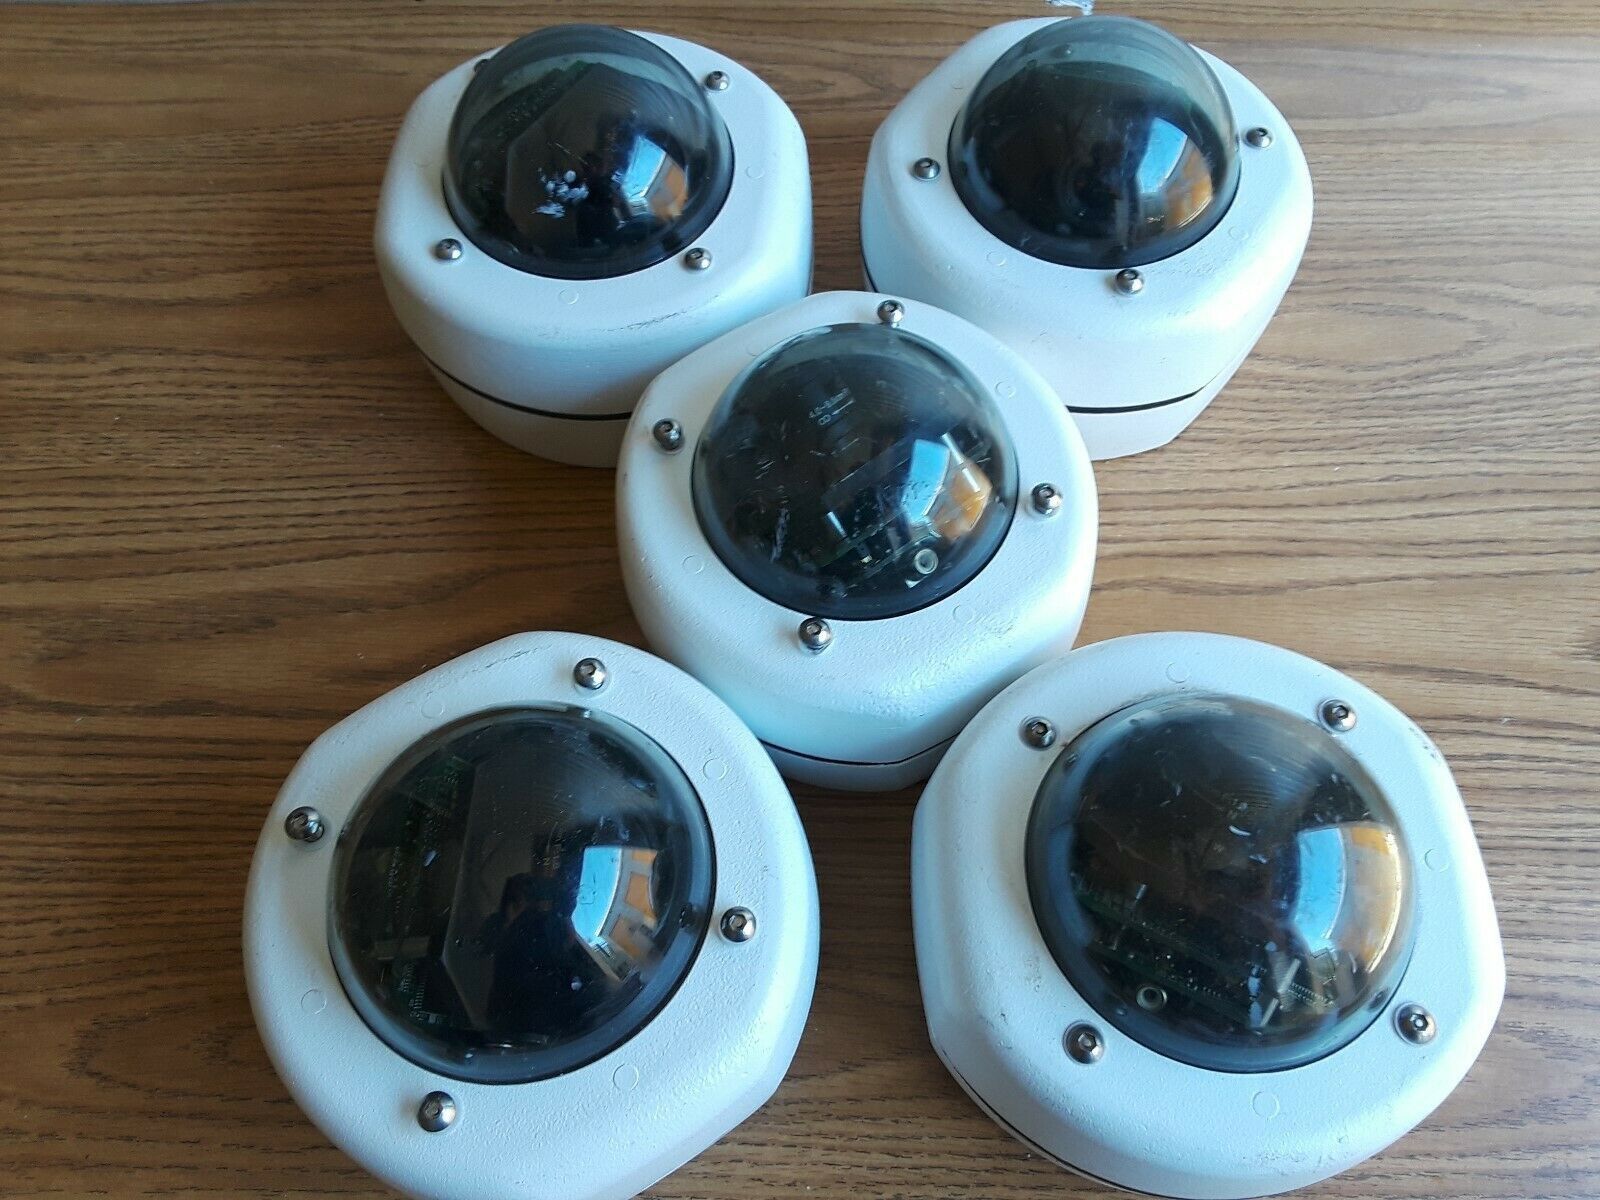 Lot of 5 IQeye 511DV IqinVision WK Vandal Resistant Dome Security Camera